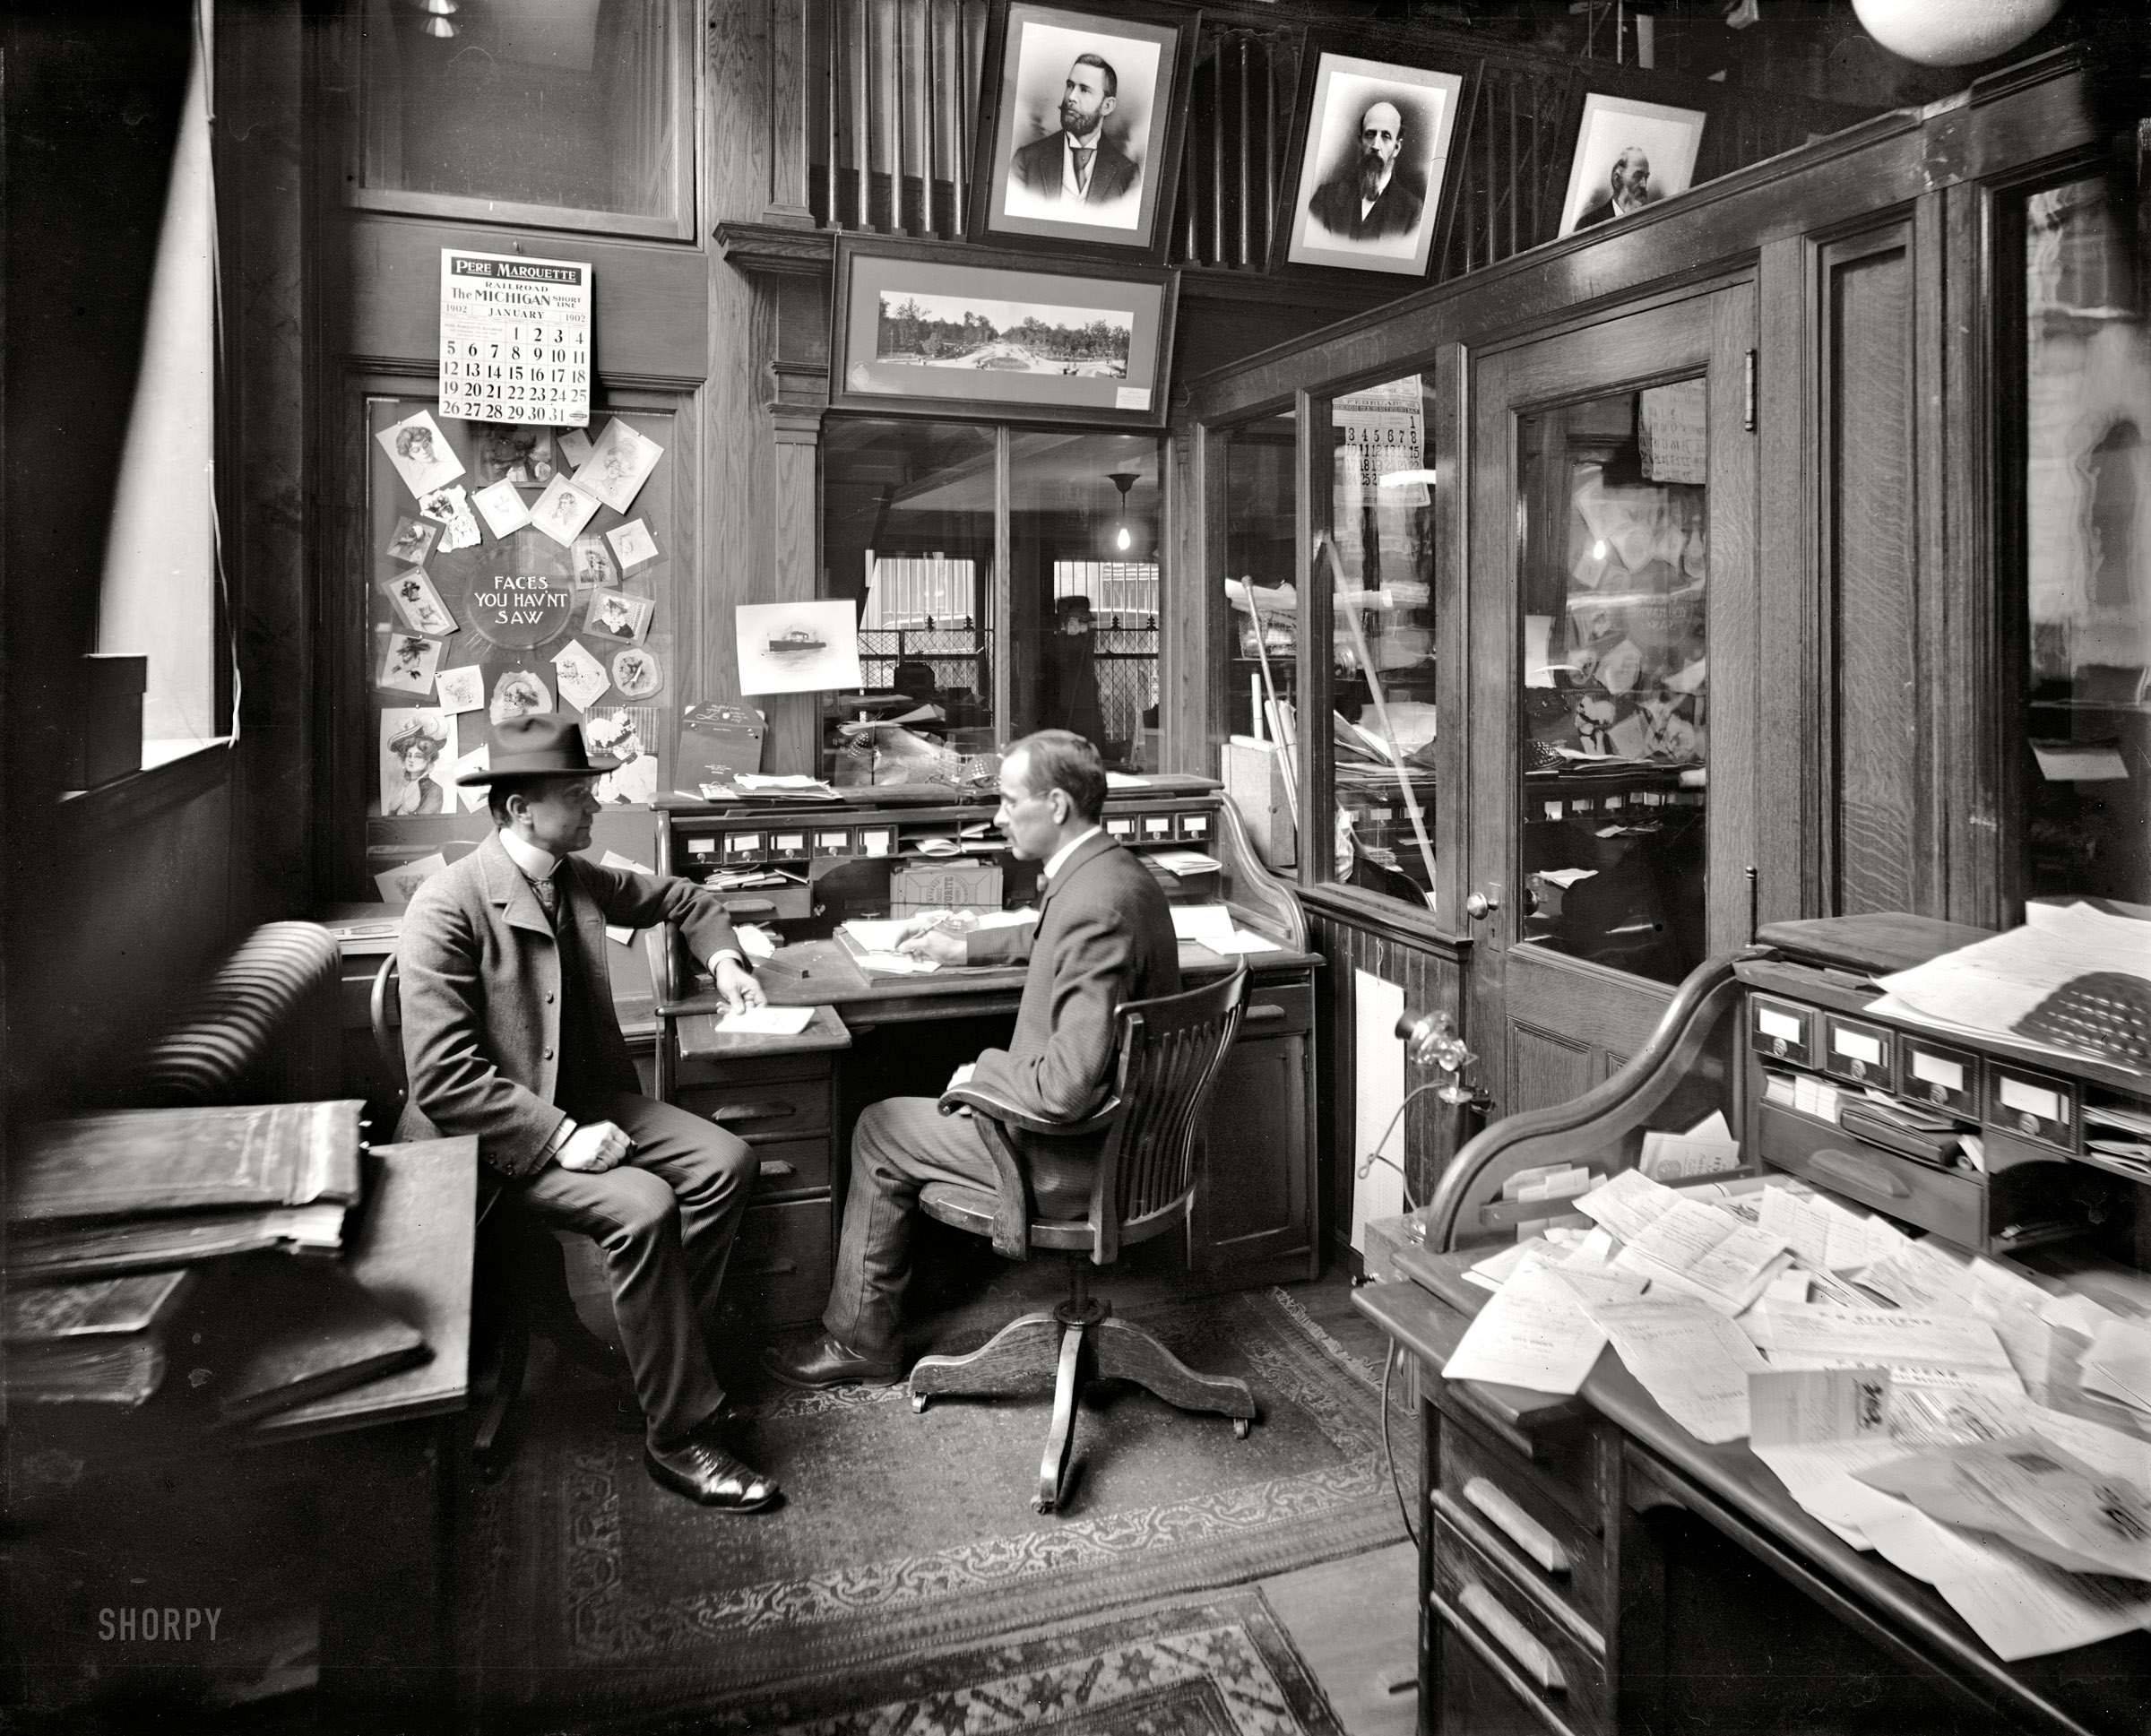 Detroit, Michigan. January 1902. "Richmond & Backus Co. office." Our third peek behind the scenes at R&B -- printers, binders and "office outfitters" -- reveals a cozily cluttered workspace enlivened by a display of "faces you have'nt saw." 8x10 inch dry plate glass negative, Detroit Publishing Company. View full size.